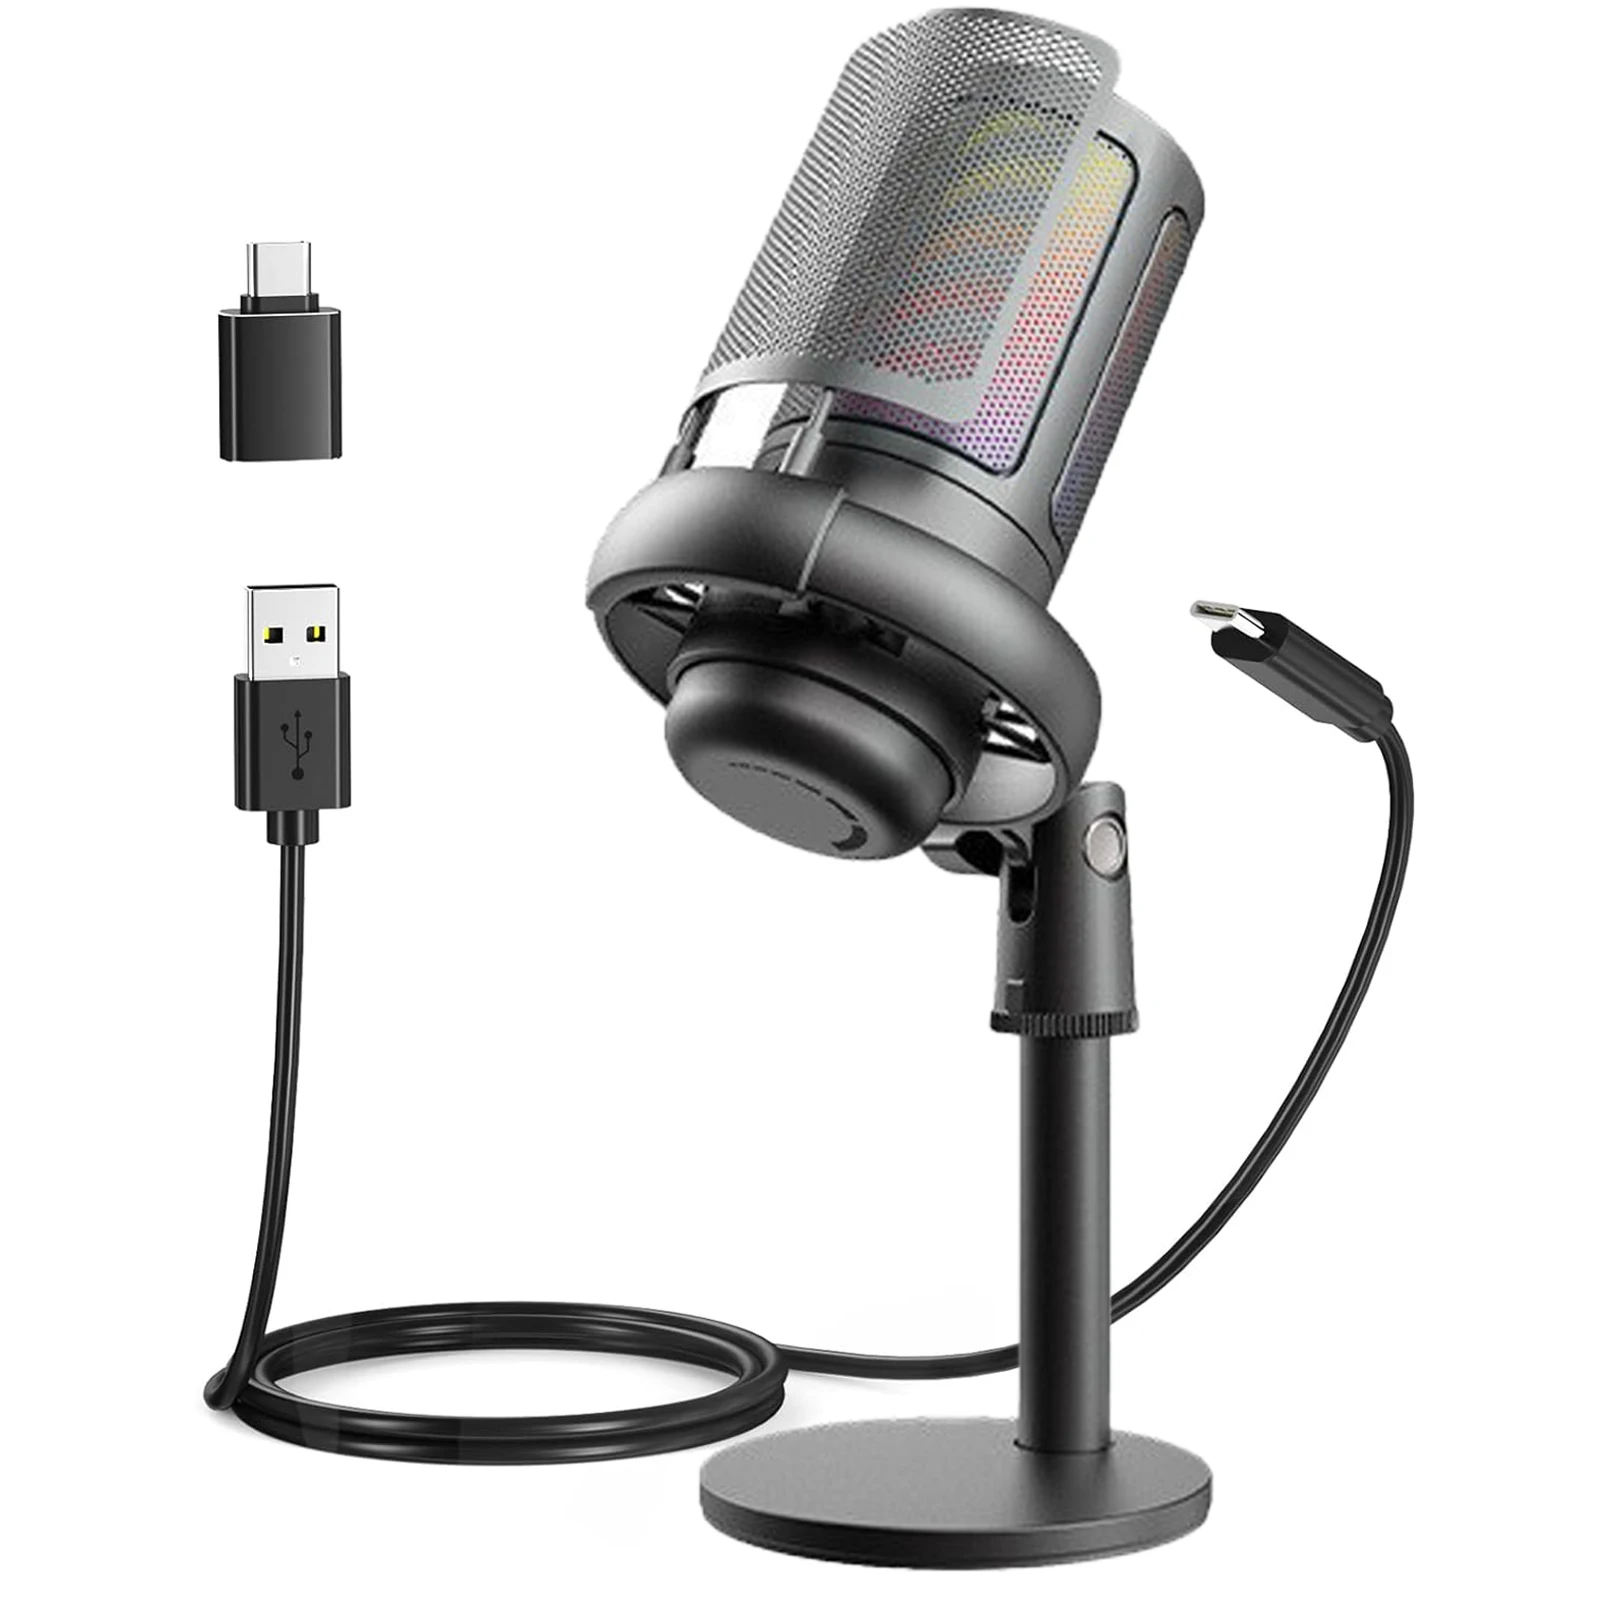 

USB Condenser Microphone with RGB Light for Professional Recording Streaming Video Games and Podcasts on PC Laptop Computer